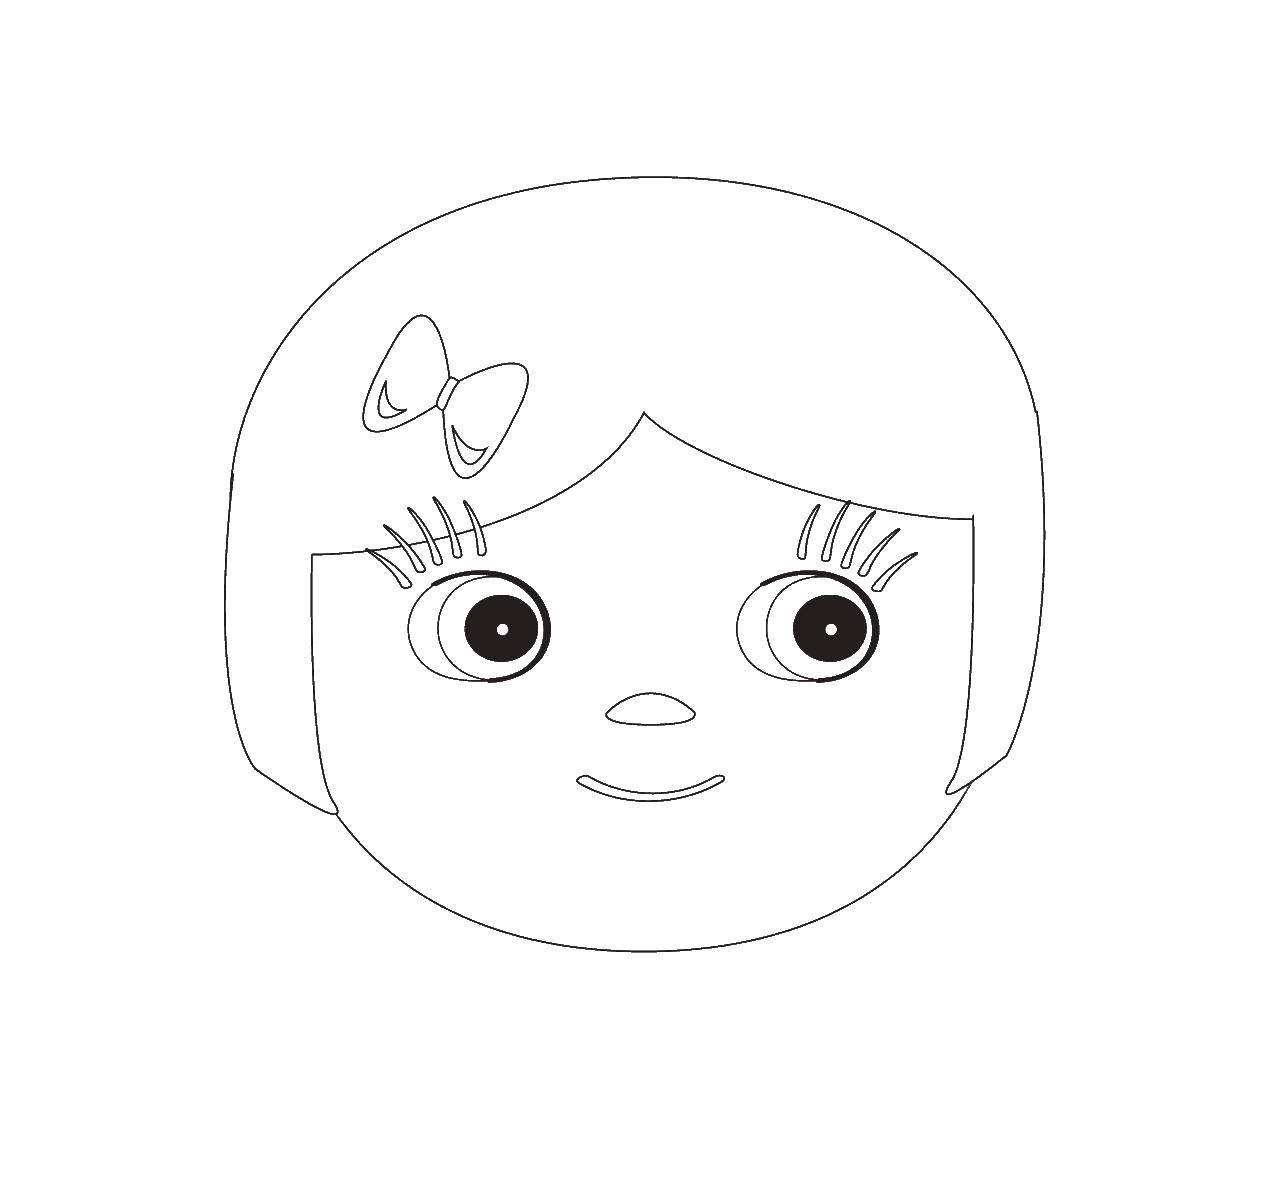 Coloring Girl with a bow. Category Face. Tags:  girl , bow.